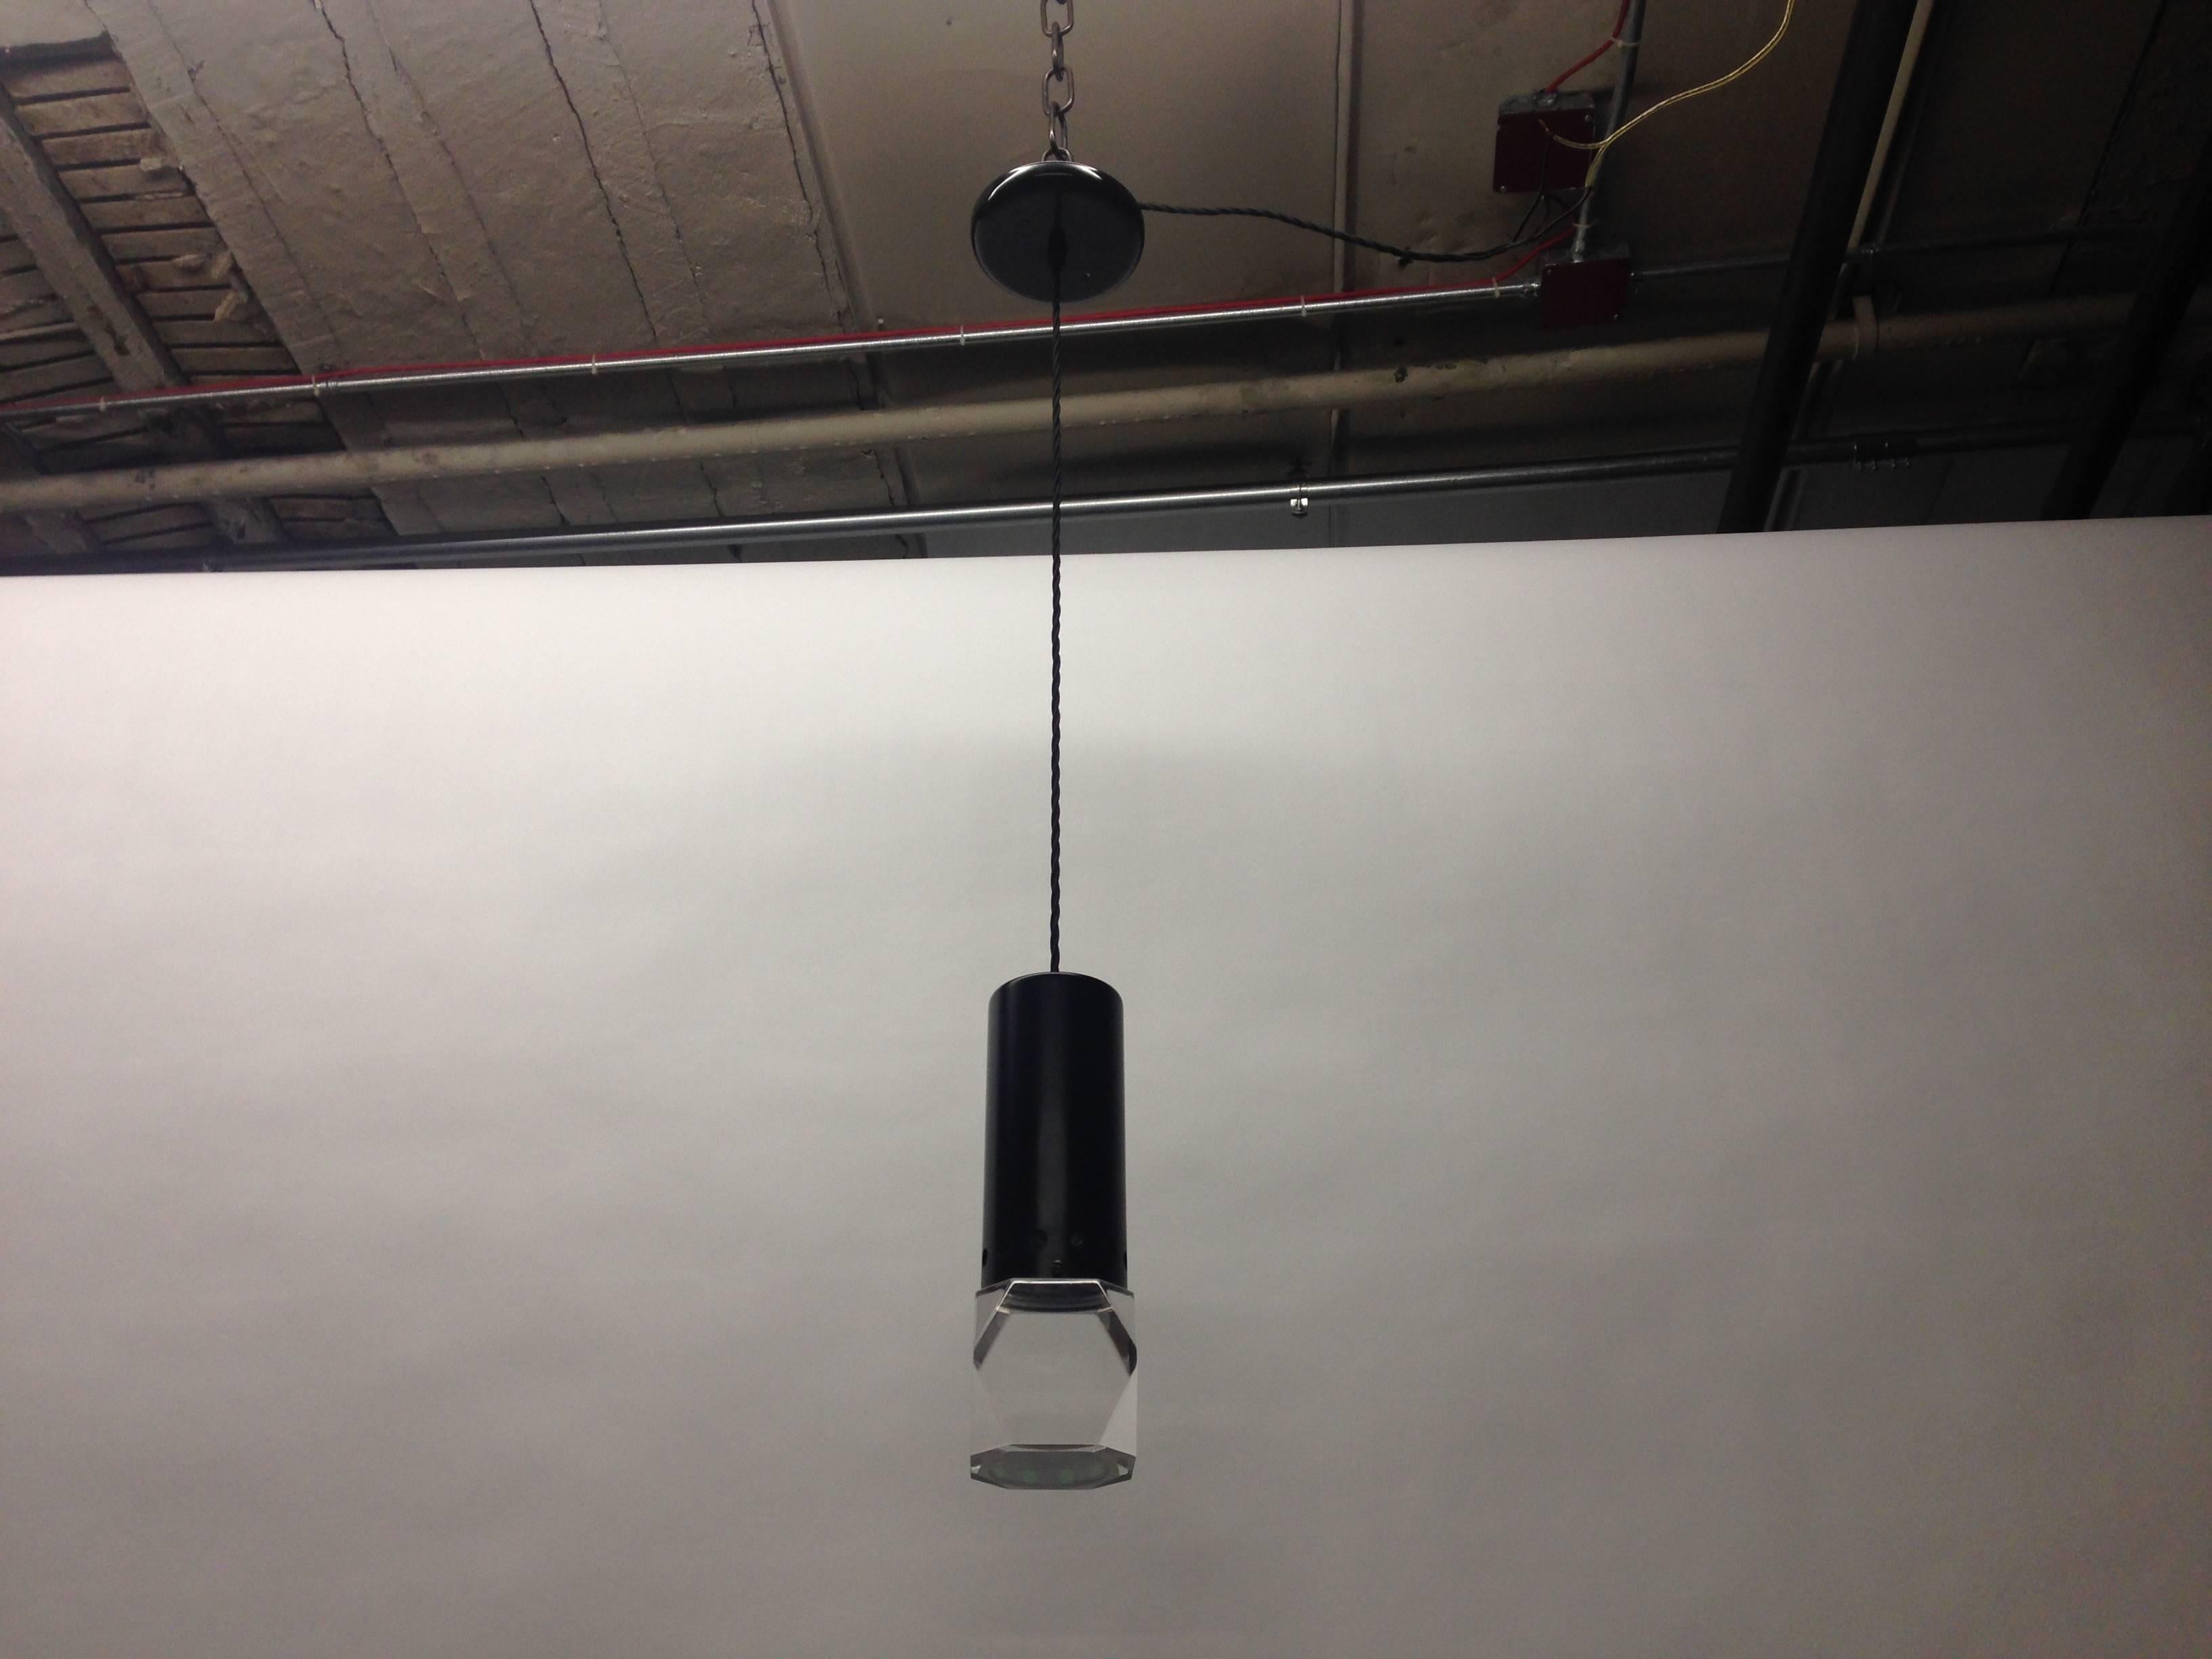 Pair of ceiling lights with thick, angularly cut clear acrylic blocks and cylindrical, black enameled metal hardware that has perforations along the bottom rim. Each light hangs from black curly wire, a black round canopy, and one candelabra socket.